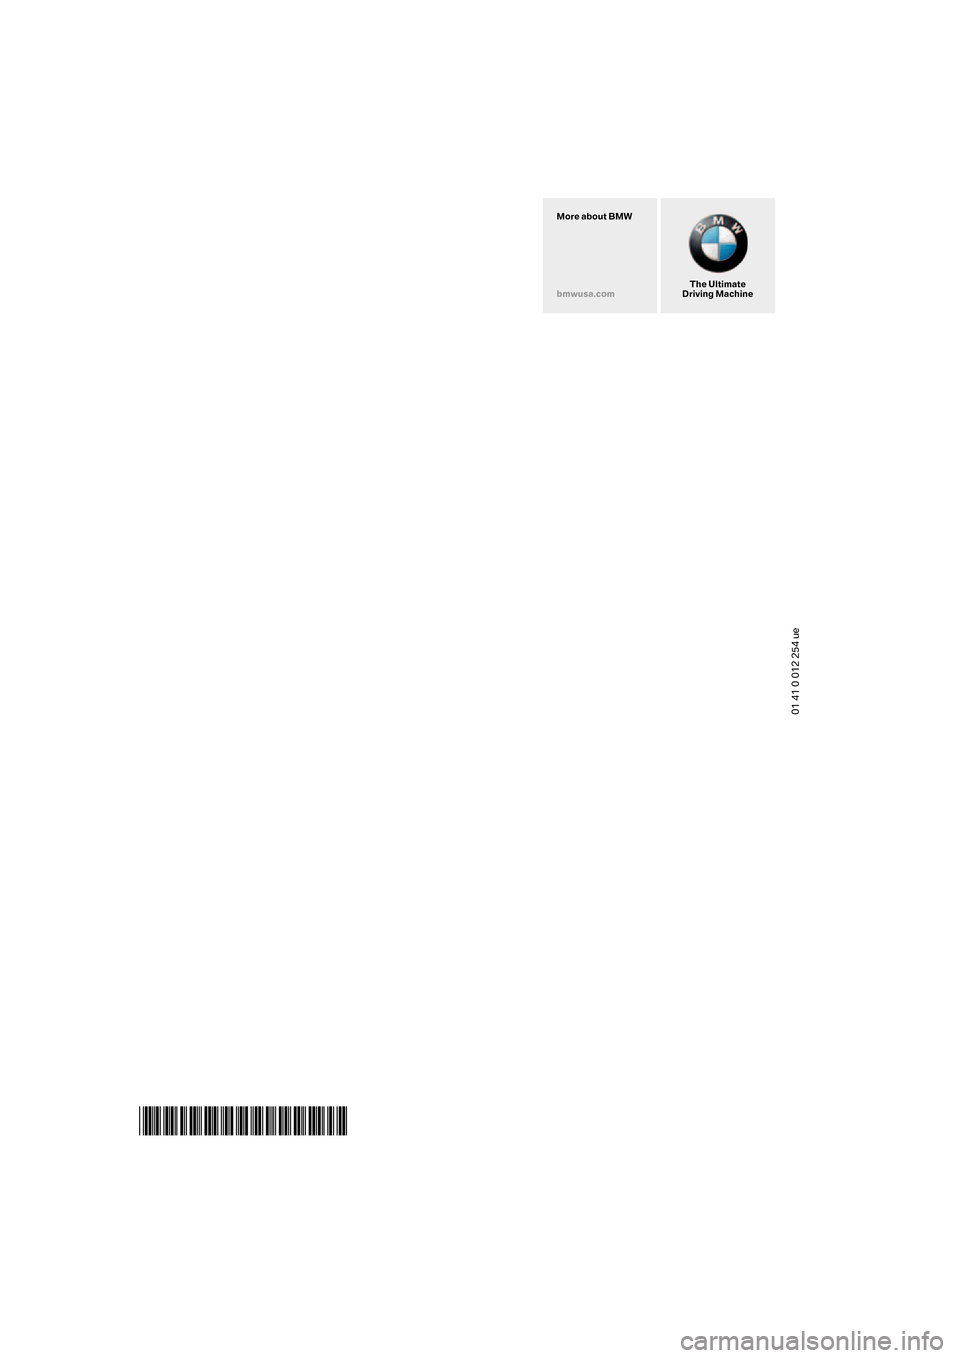 BMW 760Li 2006 E66 Owners Manual 01 41 0 012 254 ue
*BL001225400A*
The Ultimate
Driving Machine More about BMW
bmwusa.com 